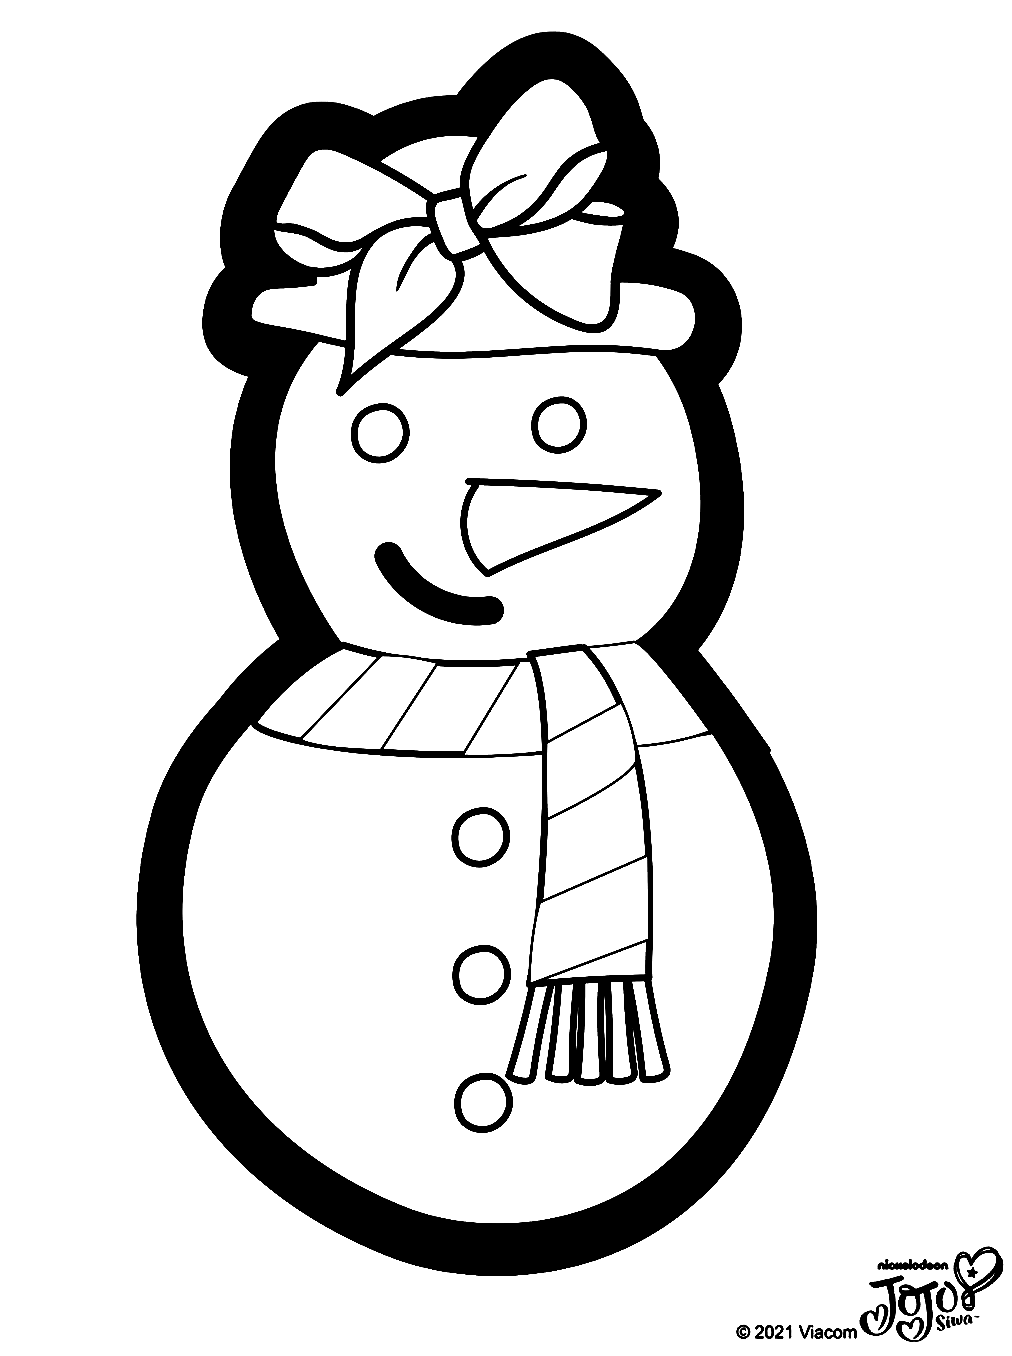 Snowman with Hair Bow of Jojo Siwa Coloring Pages